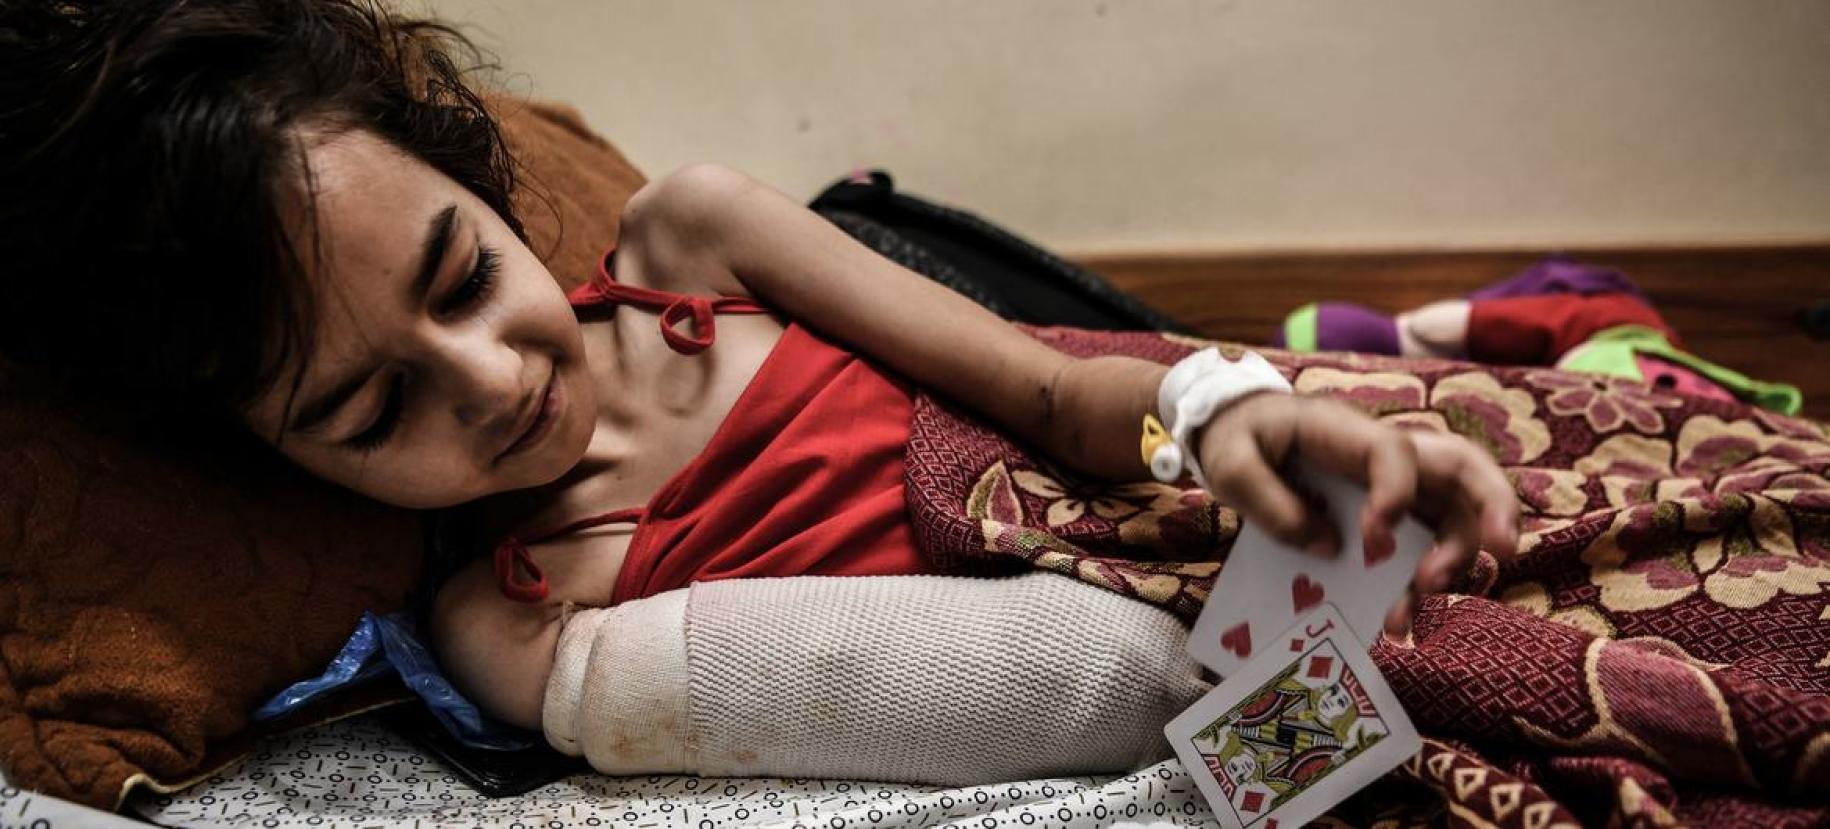 A young girl wearing a cast/covering on her arm plays with cards.